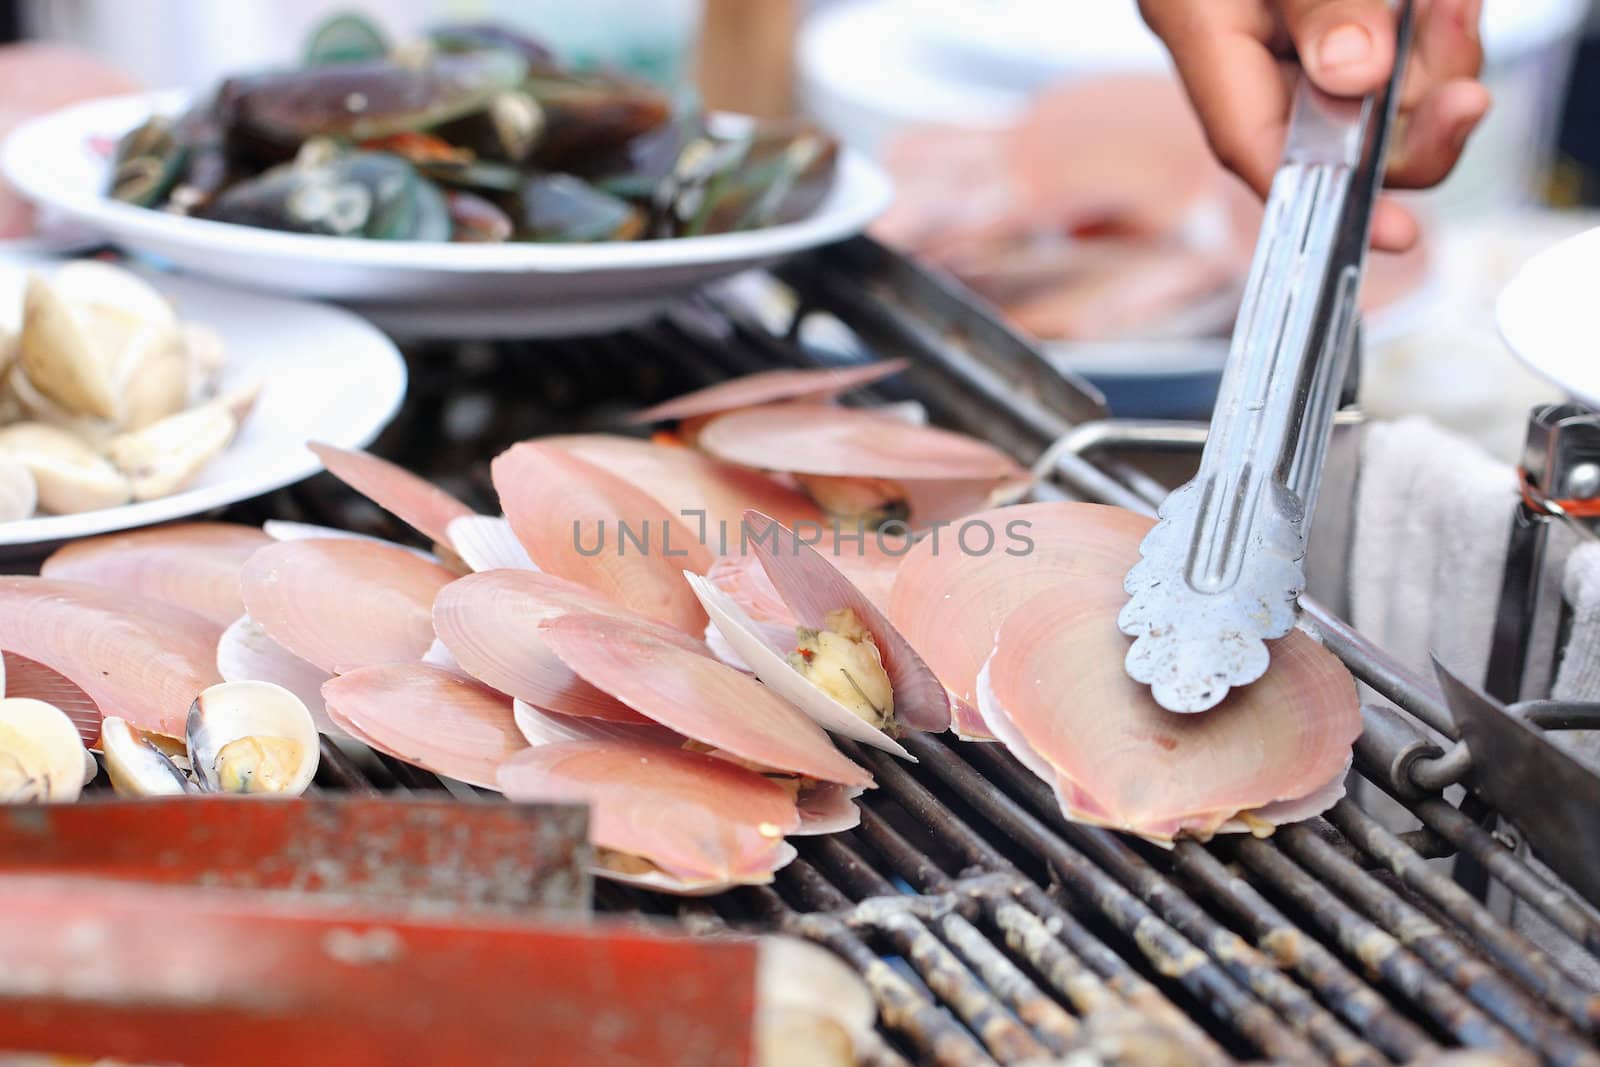 Shellfish grilled on the stove by myrainjom01